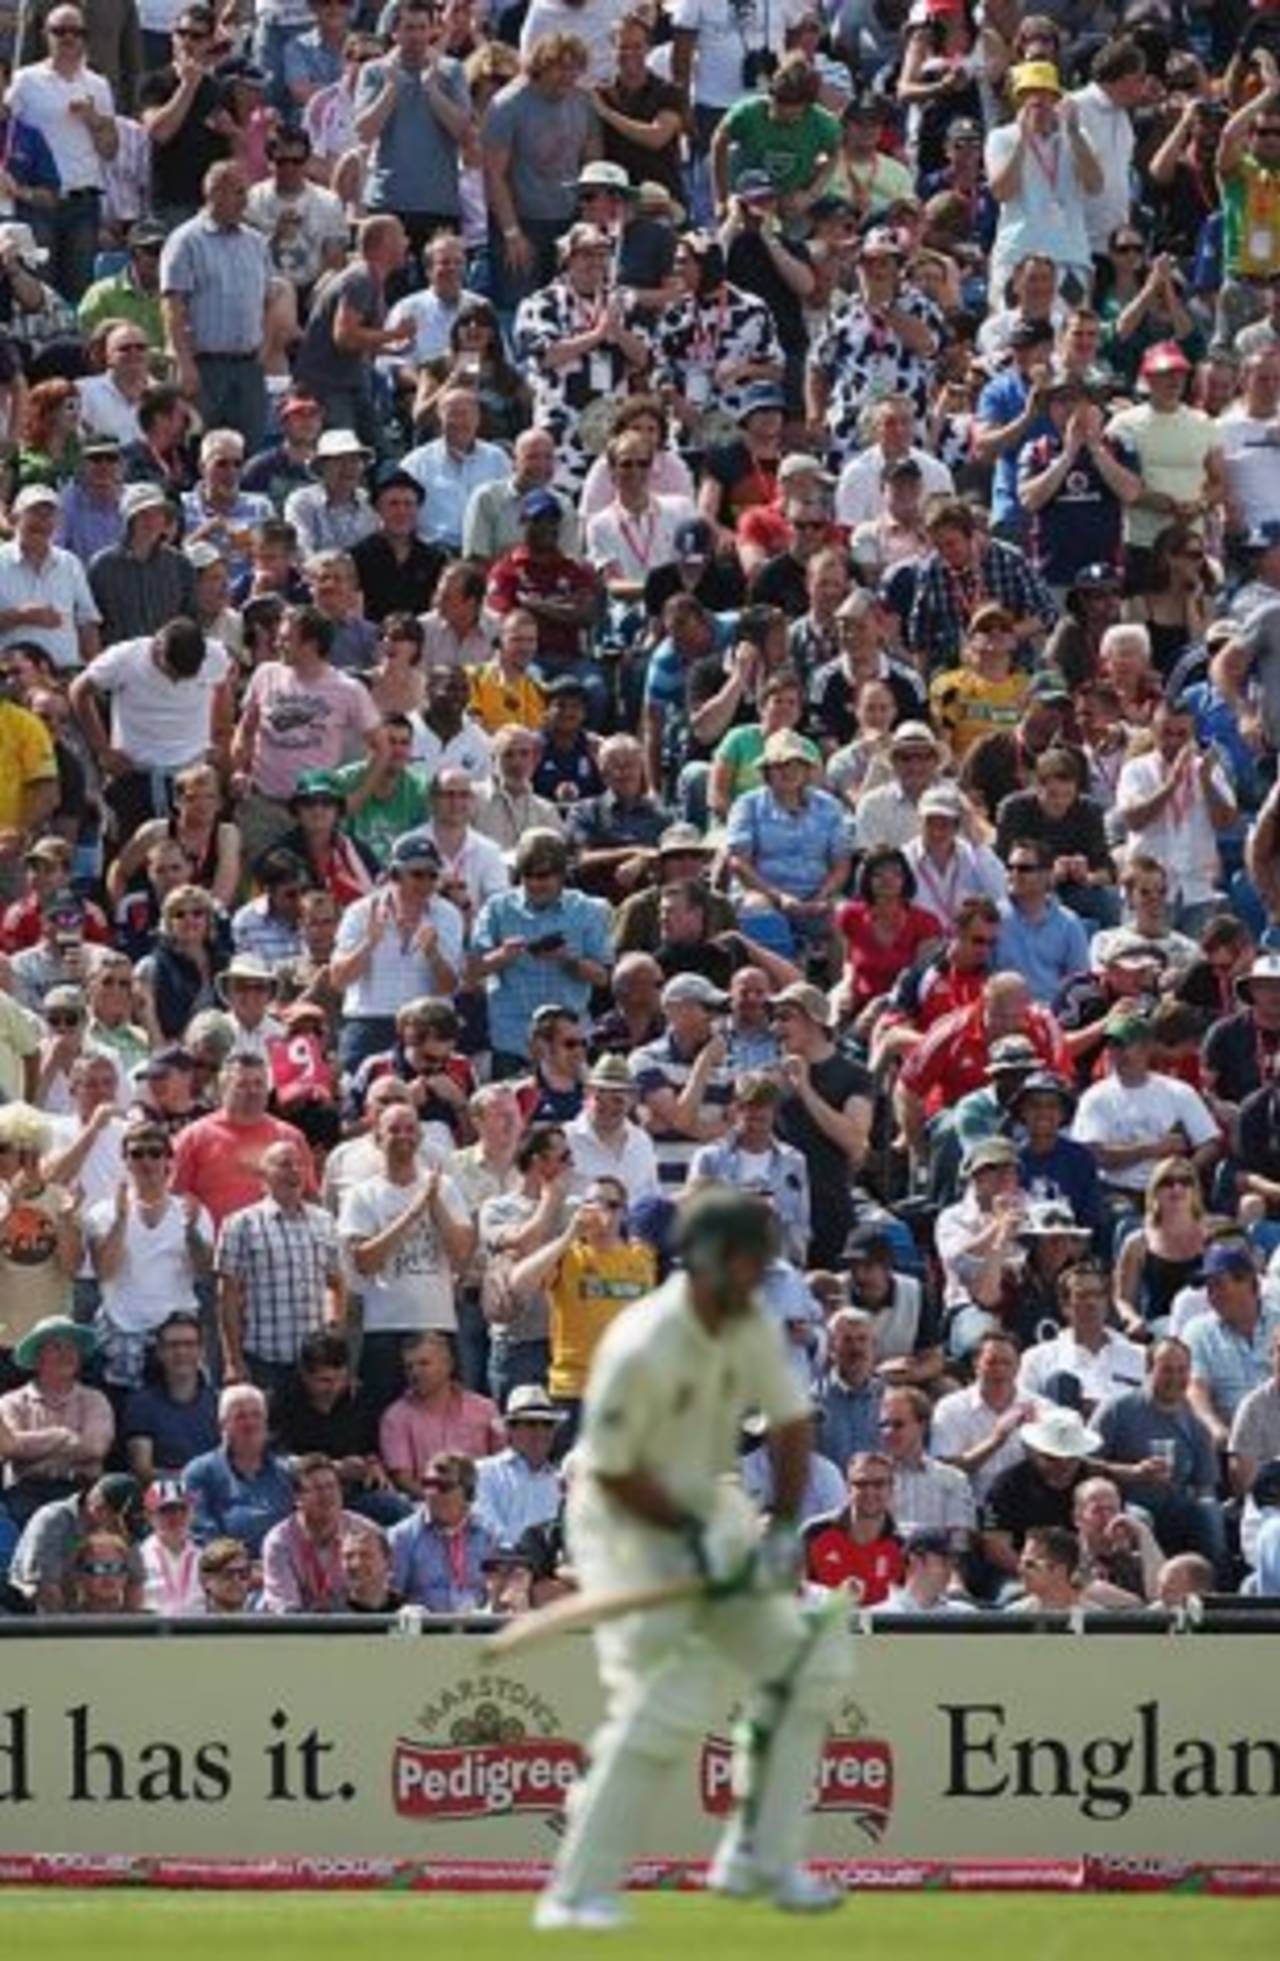 The boos when Ricky Ponting came out to bat weren't as loud as the ones at Edgbaston&nbsp;&nbsp;&bull;&nbsp;&nbsp;Getty Images